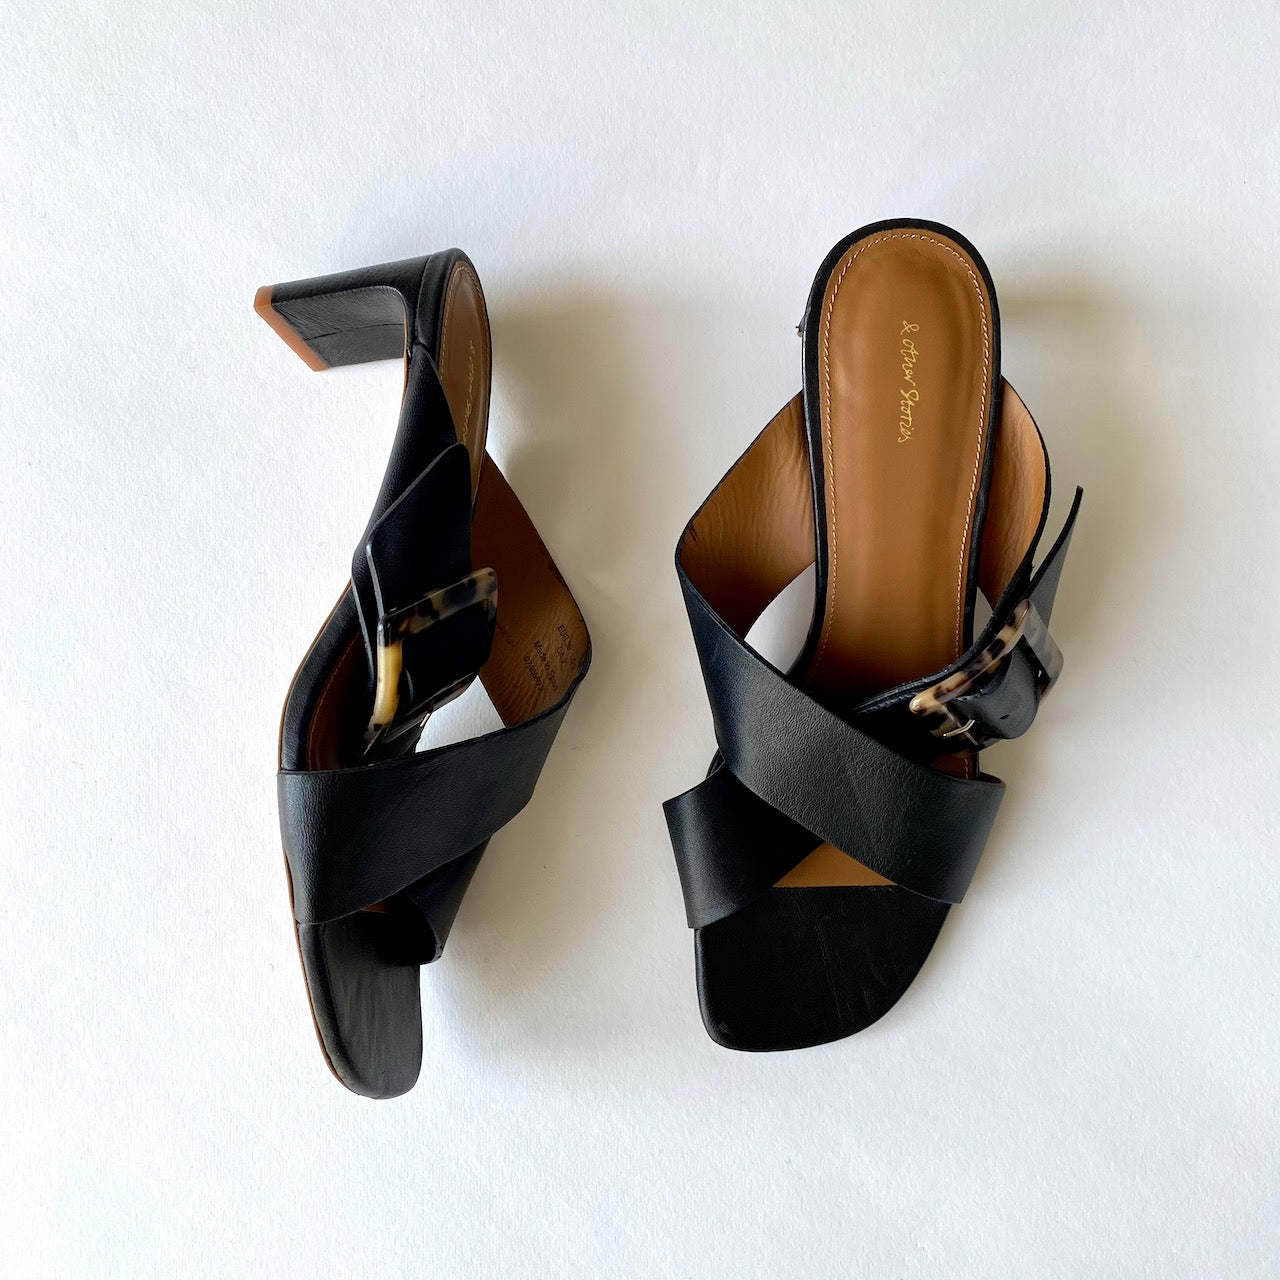 & Other Stories black leather cross-over mules